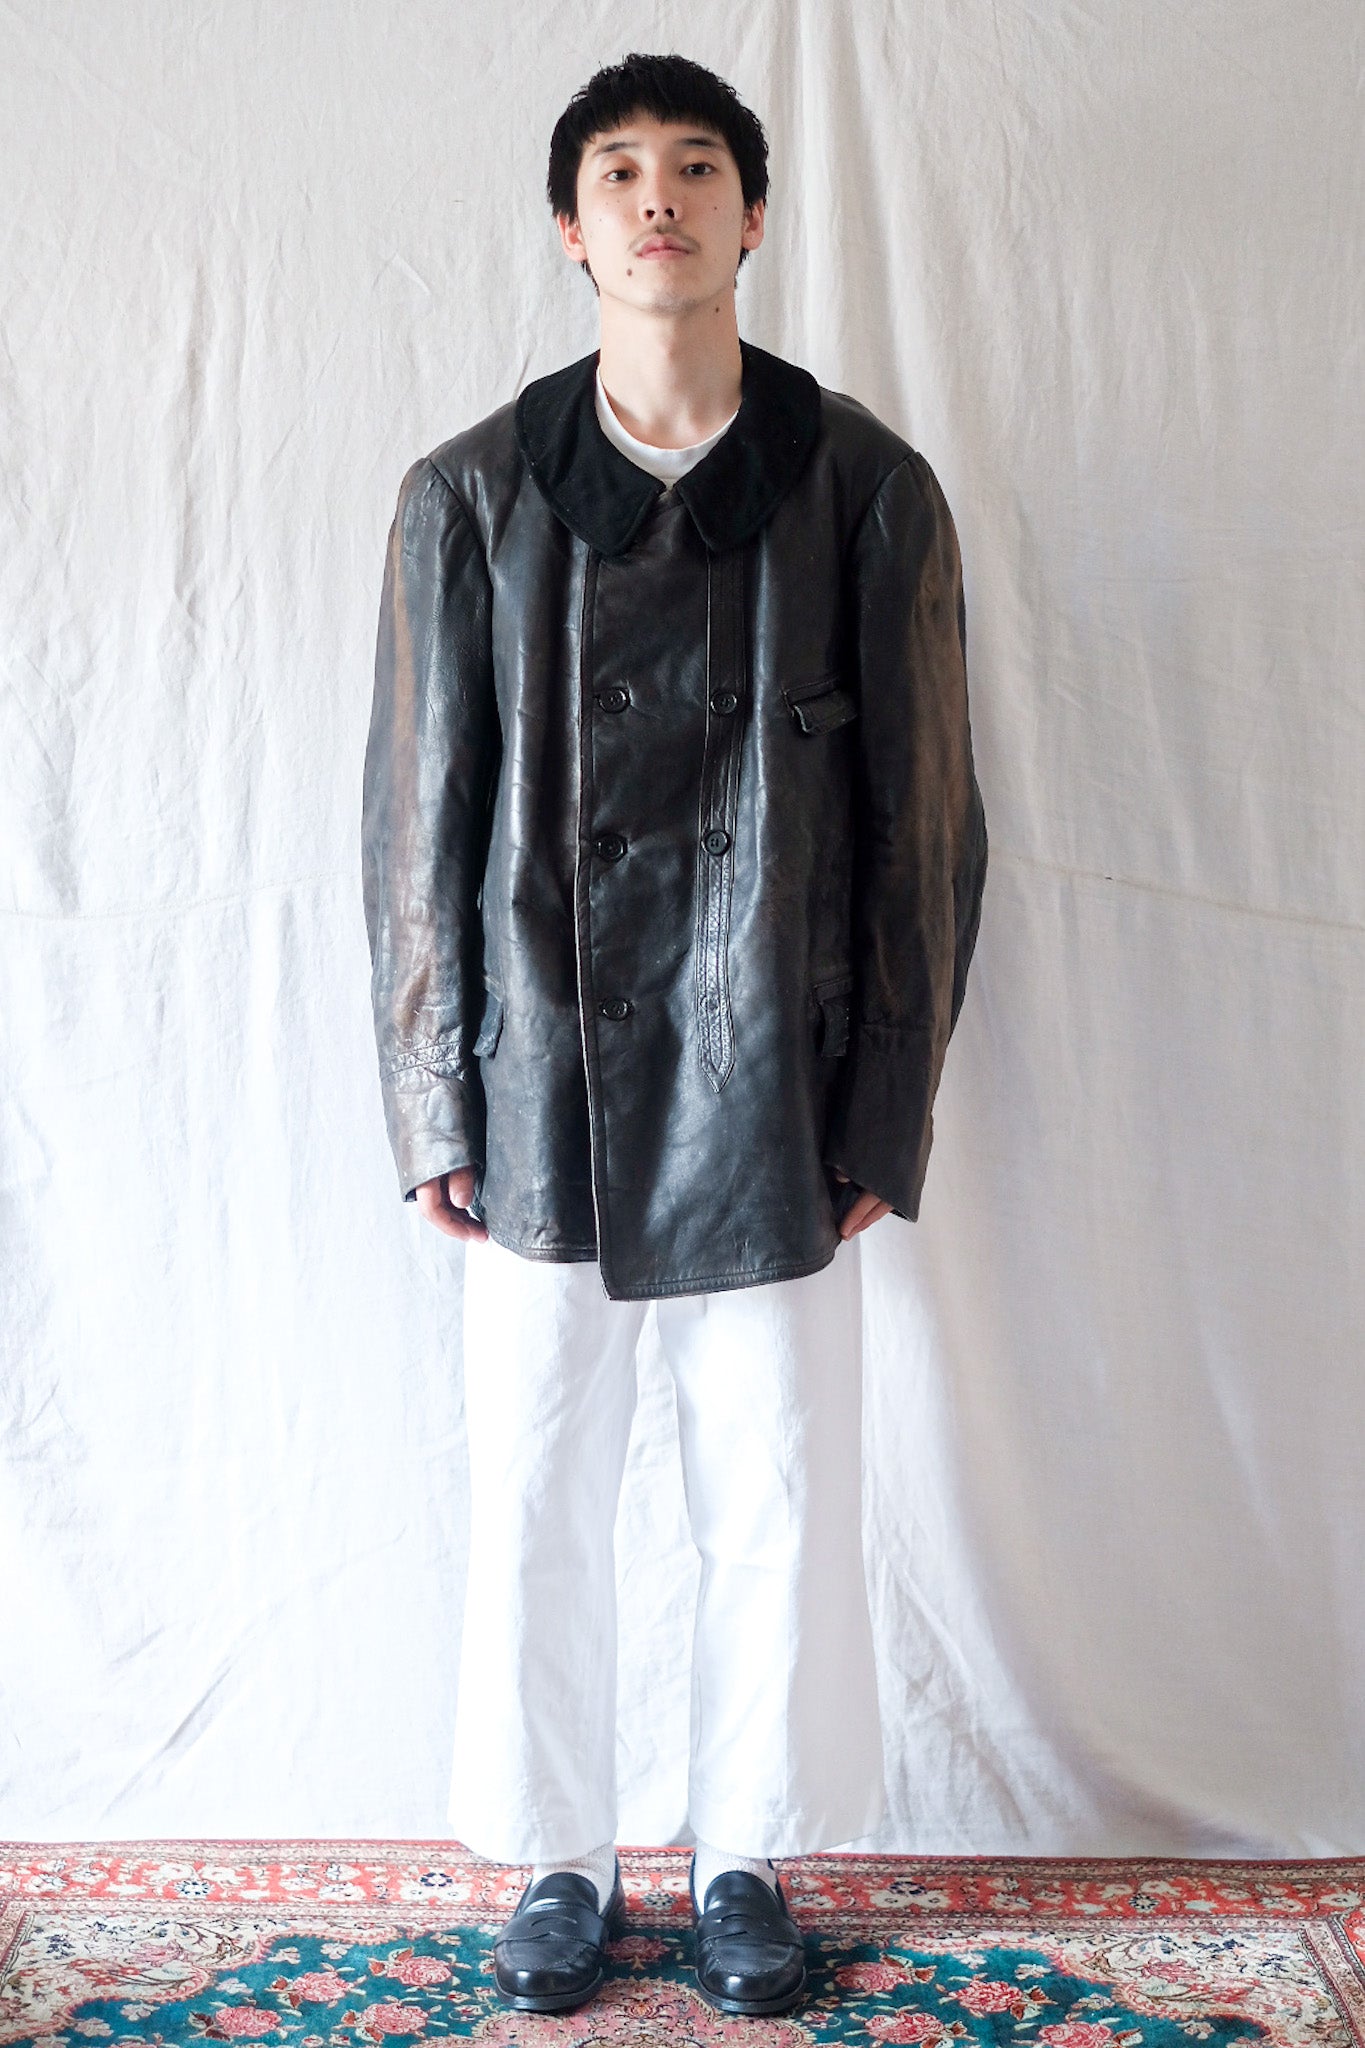 【~20's】French Vintage Le Corbusier Leather Work Jacket "Adolphe Lafont"